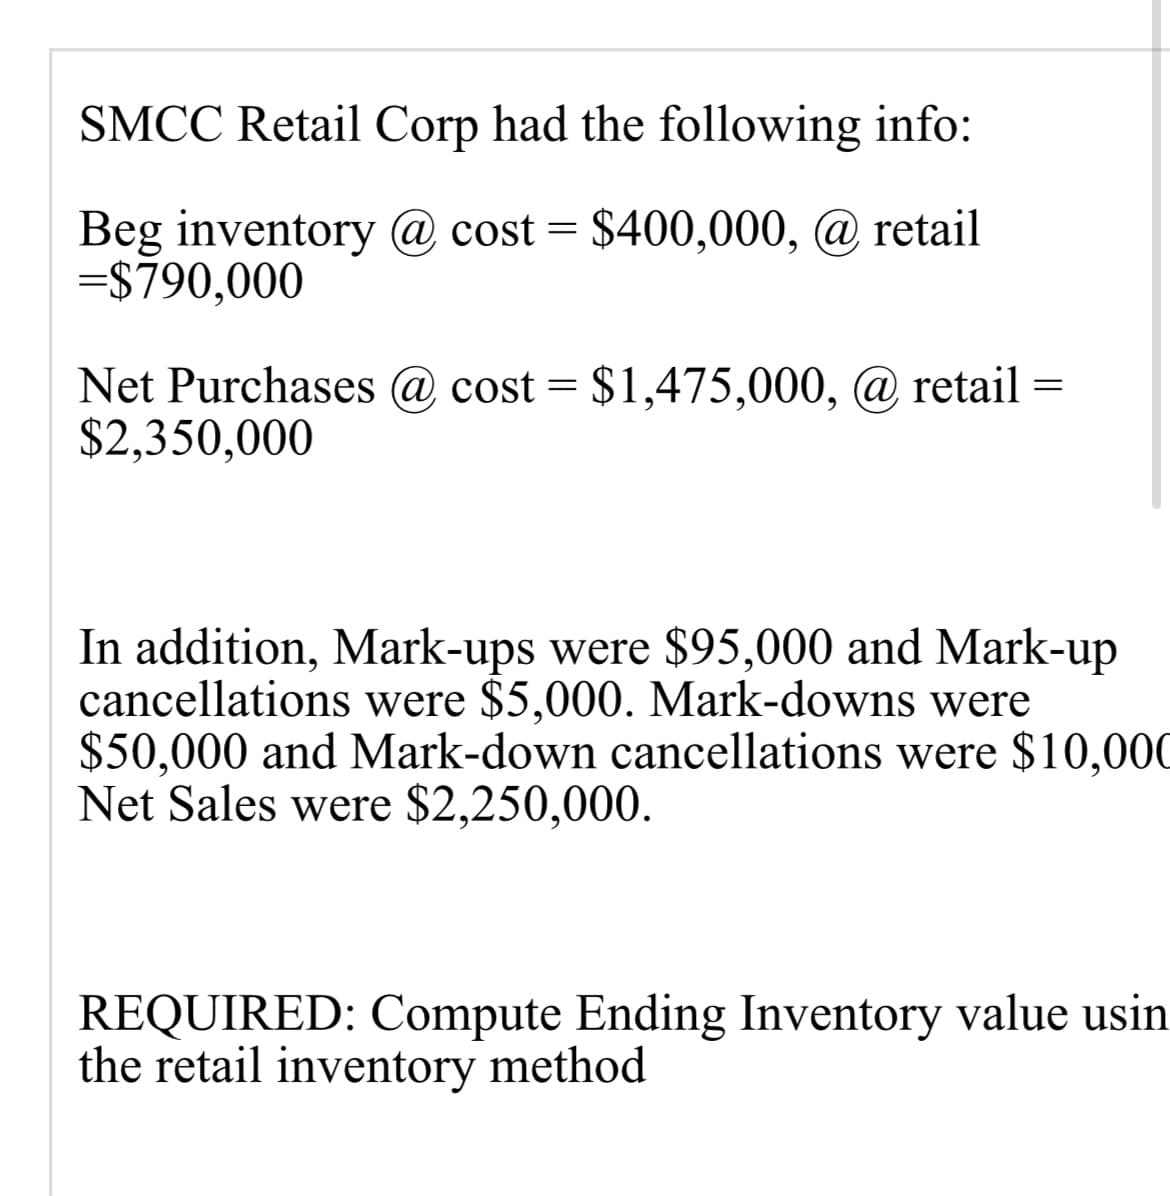 SMCC Retail Corp had the following info:
Beg inventory @ cost = $400,000, @ retail
=$790,000
Net Purchases @ cost = $1,475,000, @ retail =
$2,350,000
In addition, Mark-ups were $95,000 and Mark-up
cancellations were $5,000. Mark-downs were
$50,000 and Mark-down cancellations were $10,000
Net Sales were $2,250,000.
REQUIRED: Compute Ending Inventory value usin
the retail inventory method
